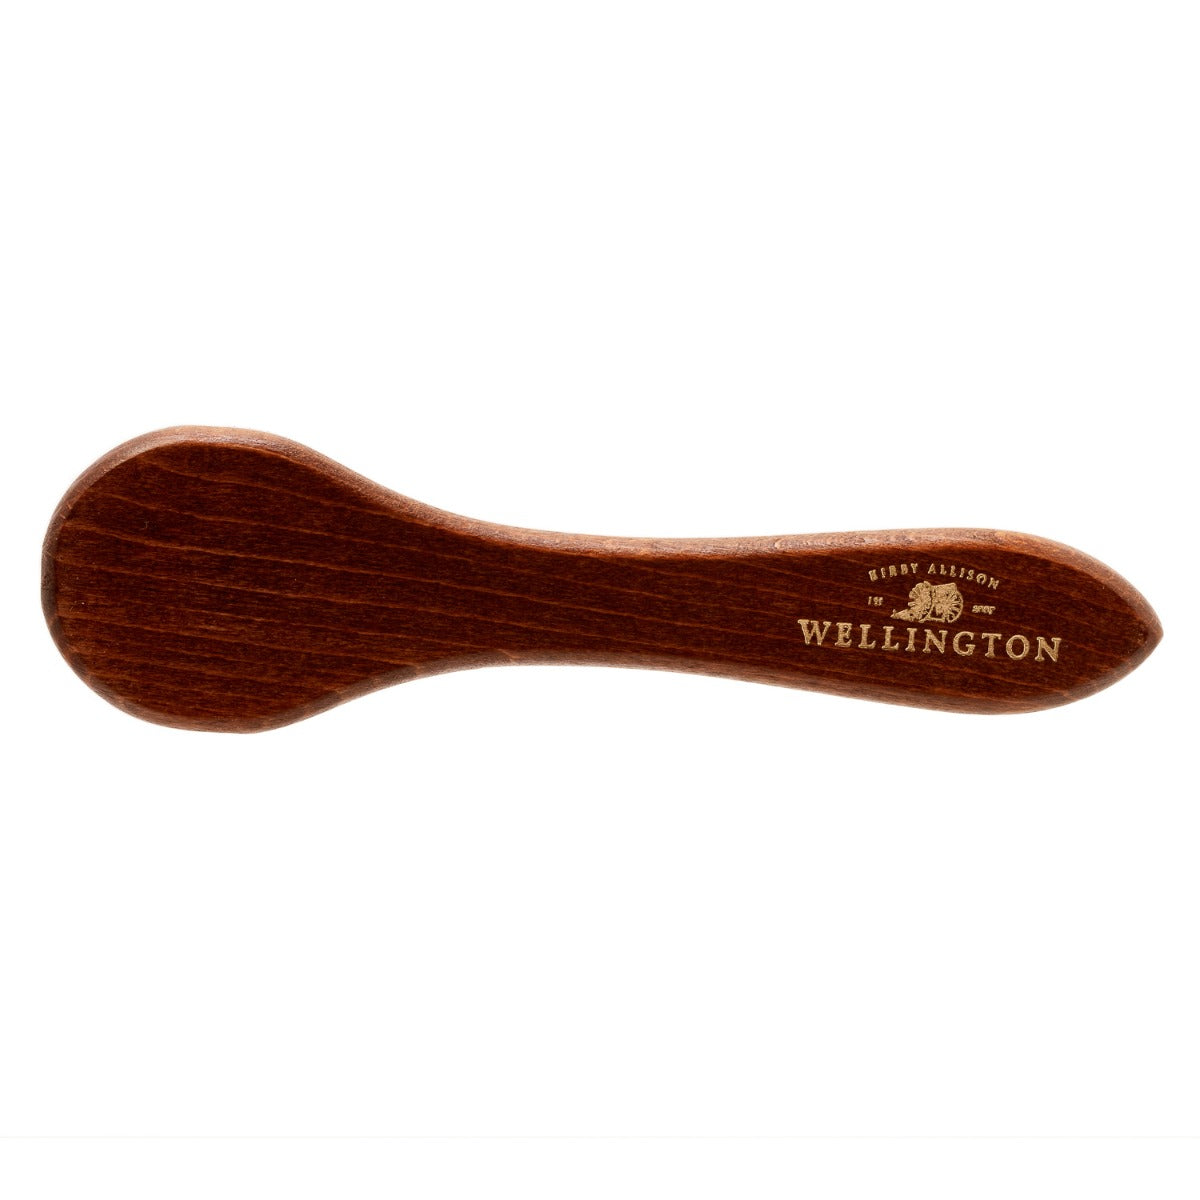 A wooden spoon engraved with the word "Williamston" and coated in KirbyAllison.com's Wellington Deluxe Shoe Polish Dauber.